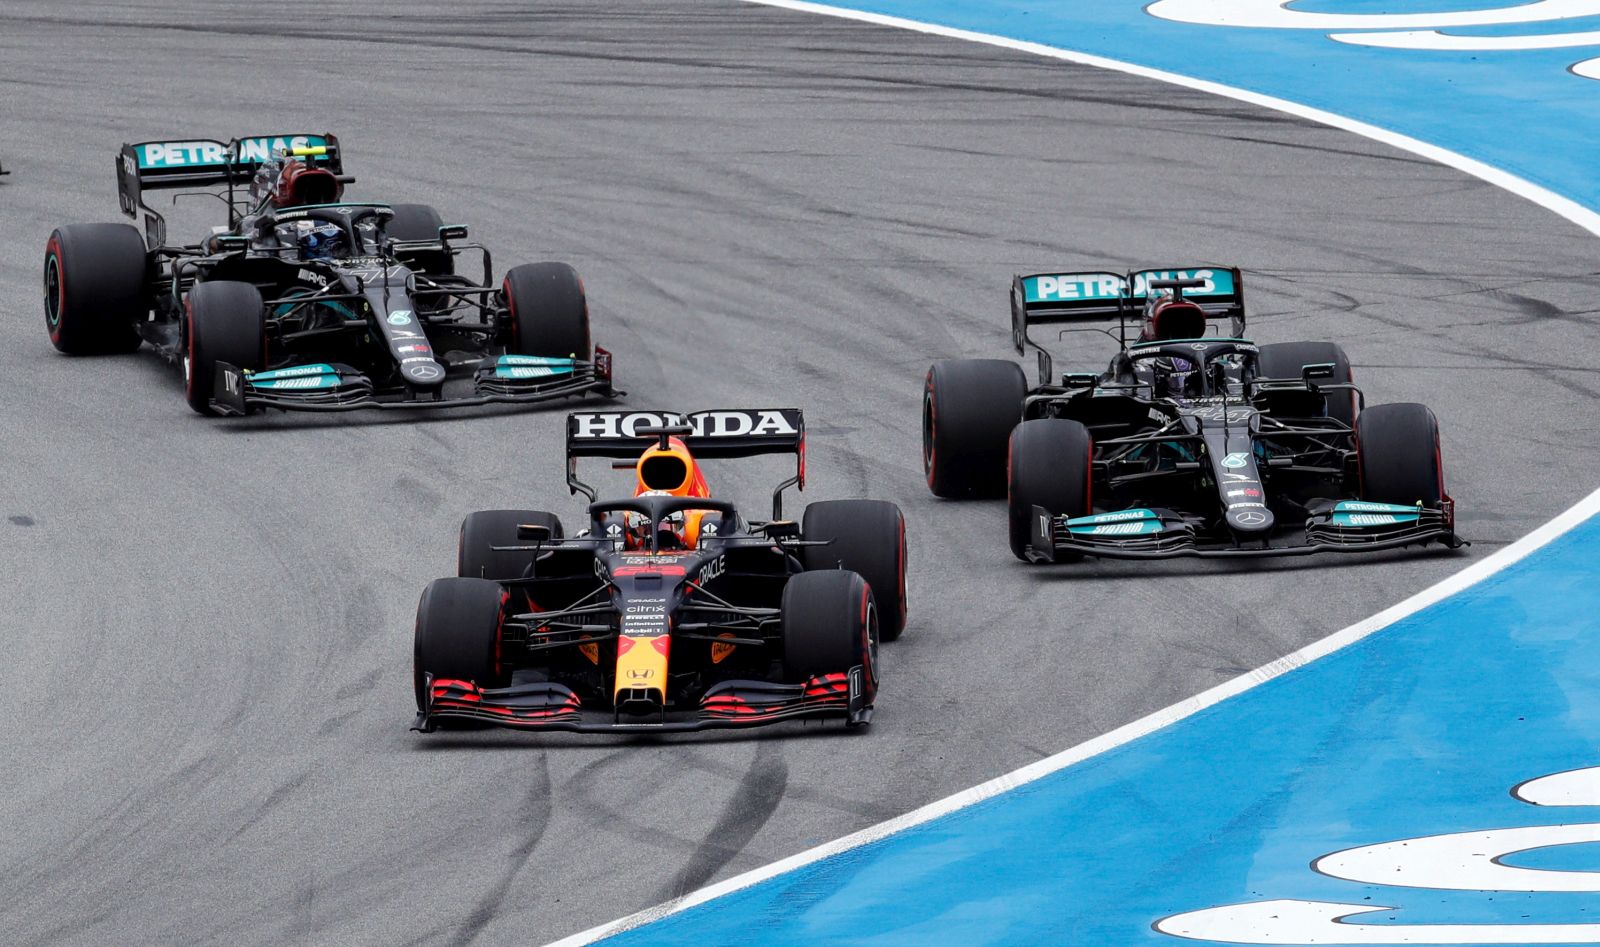 epa09187556 Dutch driver Max Verstappen (C) of Red Bull Team overtakes British driver Lewis Hamilton (R) of Mercedes next to Finnish driver Valtteri Bottas (L) of Mercedes during the Spanish Formula One Grand Prix at Montmelo racetrack in Barcelona, Spain, 09 May 2021.  EPA/ALEJANDRO GARCIA